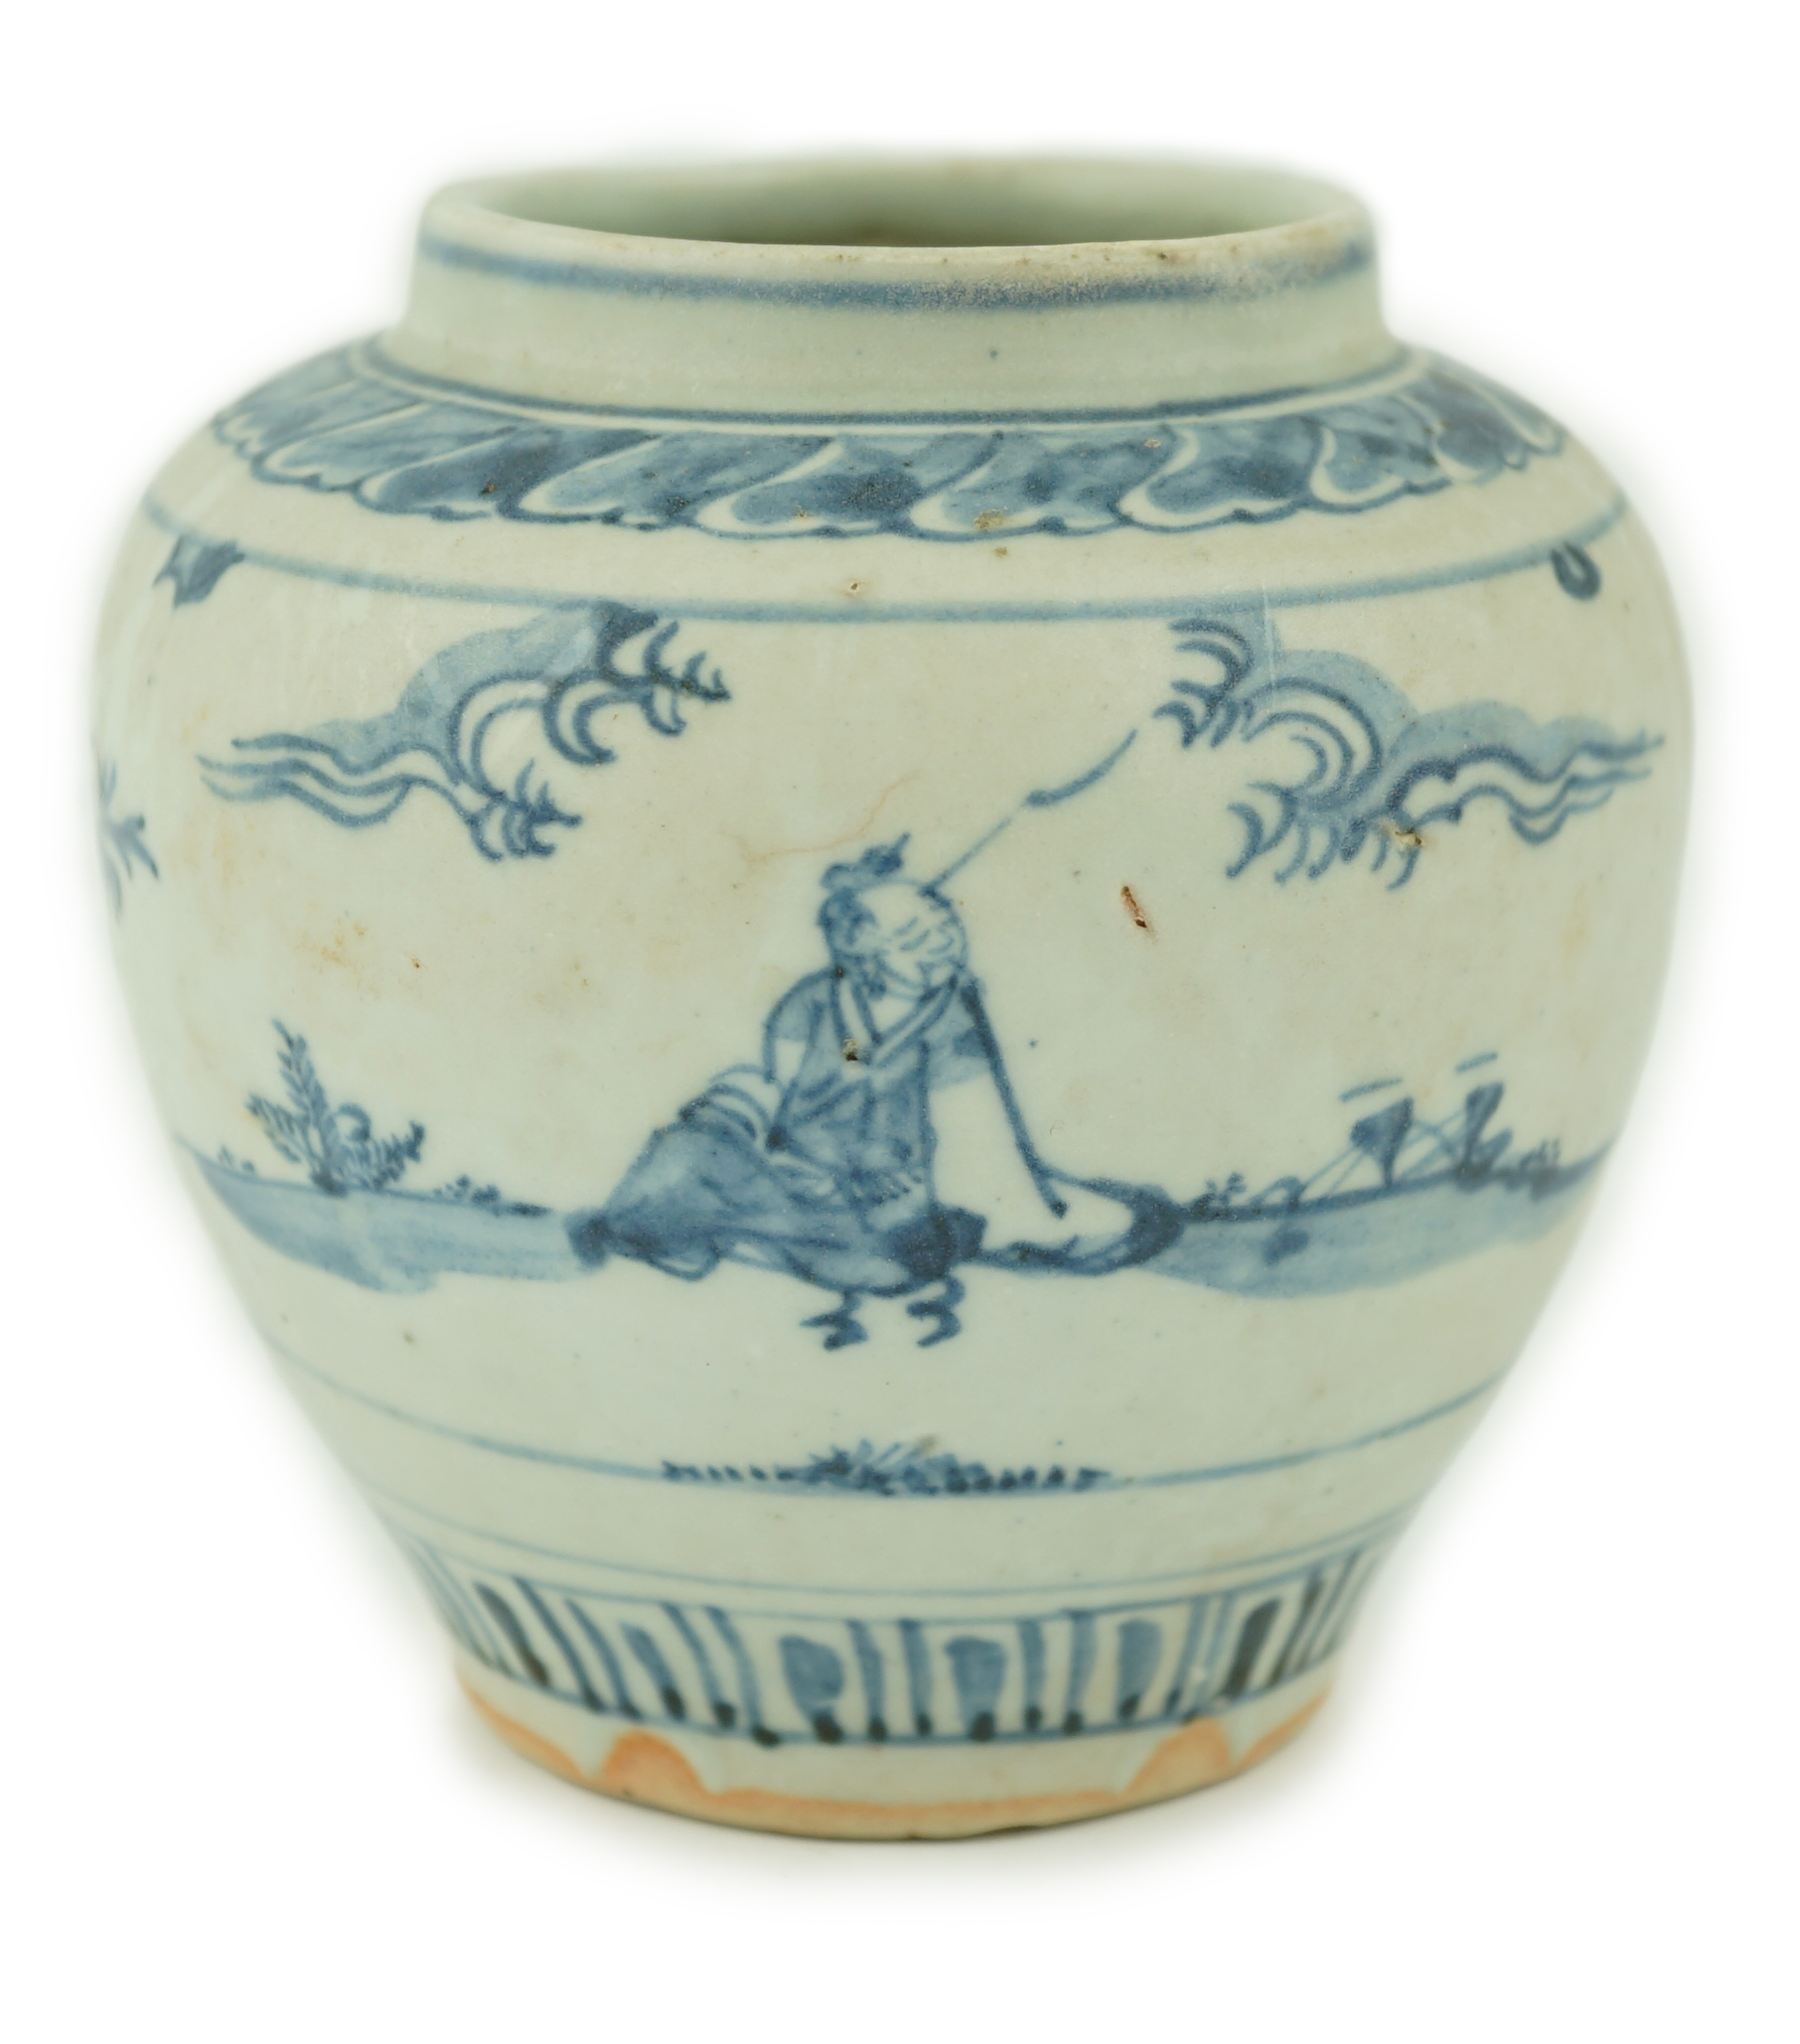 A Chinese Ming blue and white jar, late 15th century